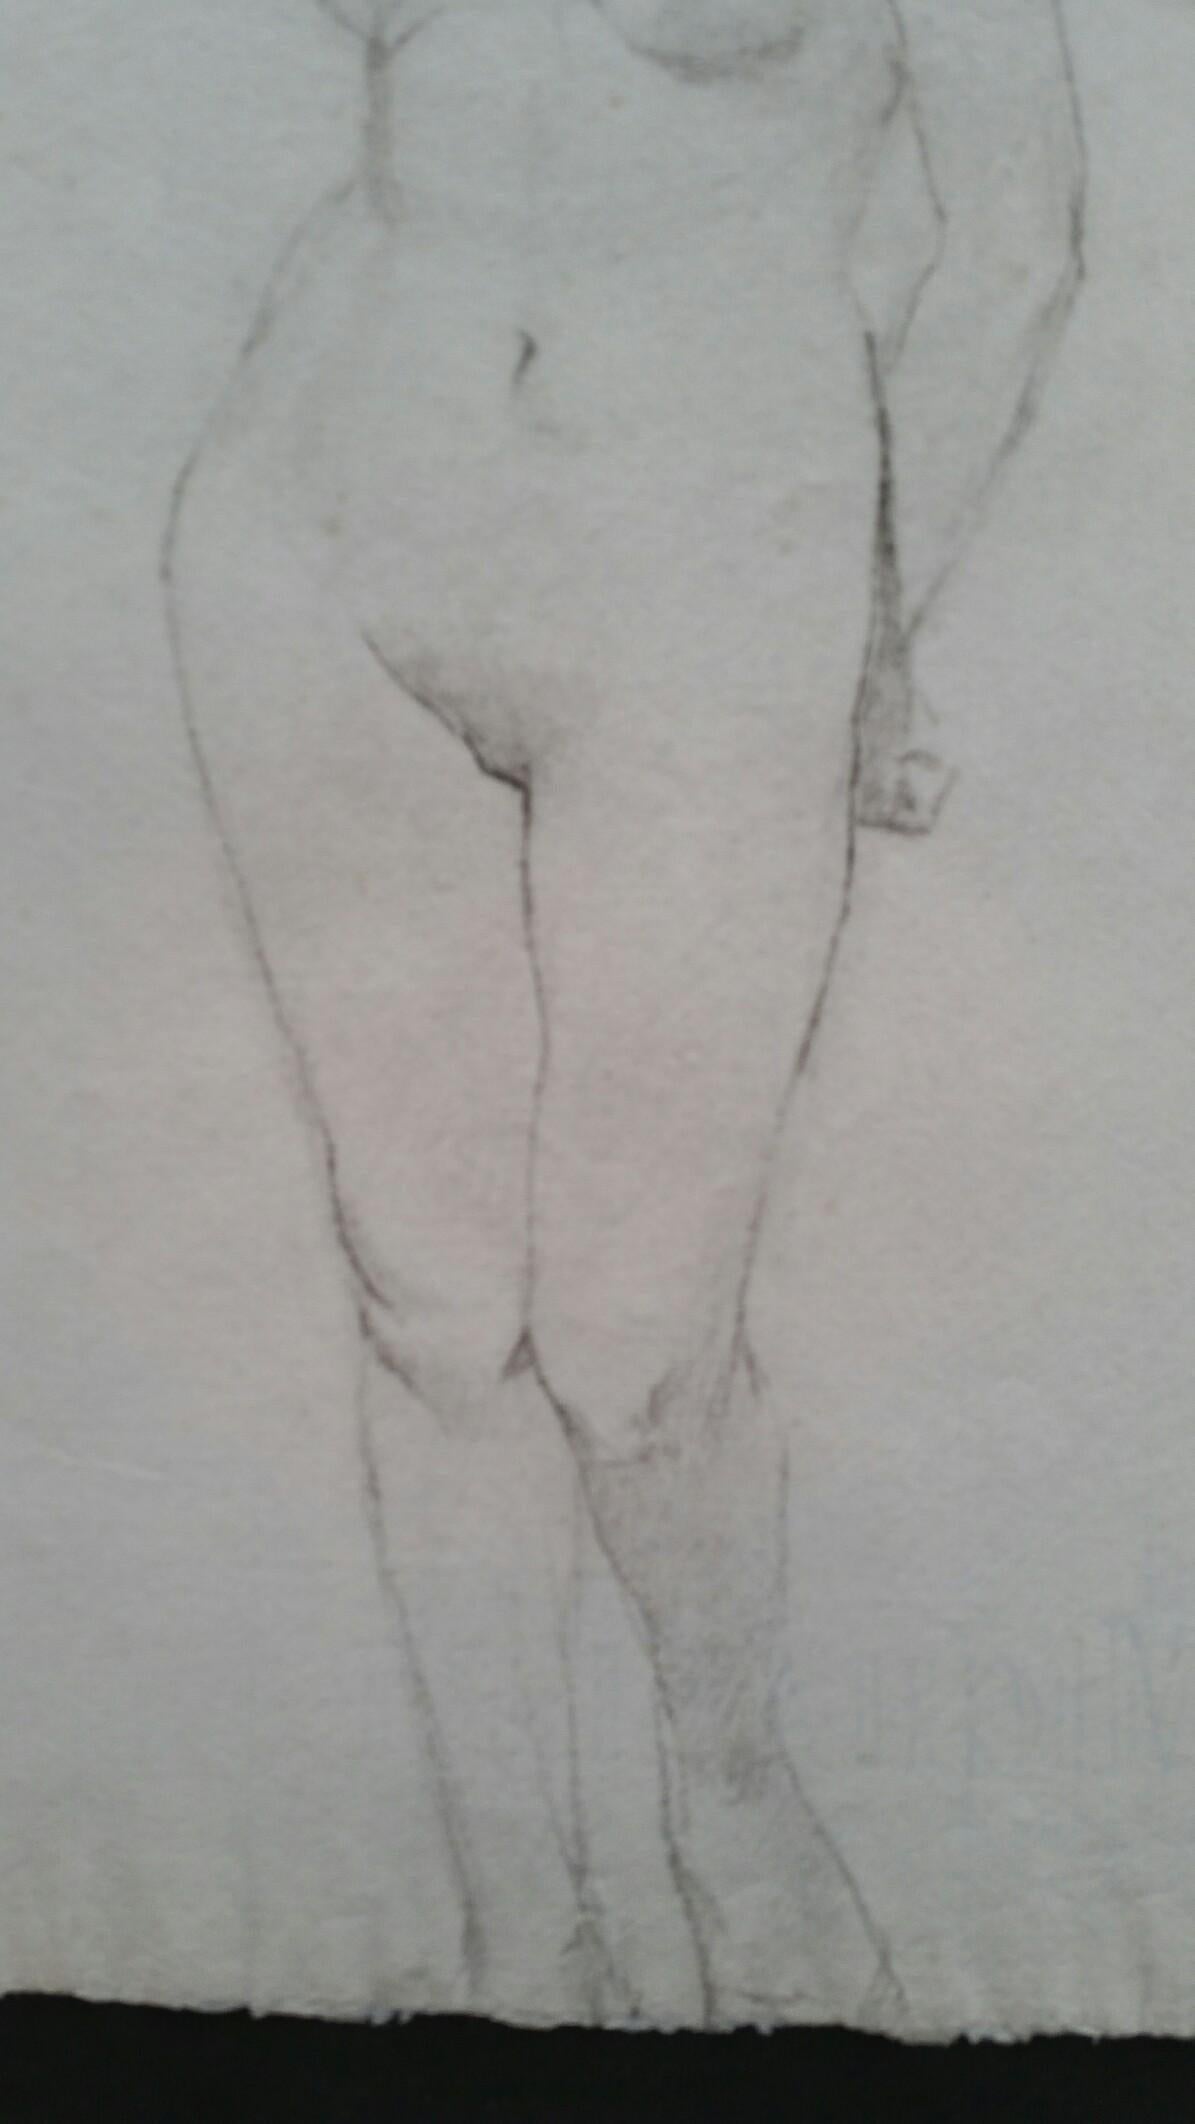 Other English Graphite Portrait Sketch of Female Nude, Standing Facing For Sale